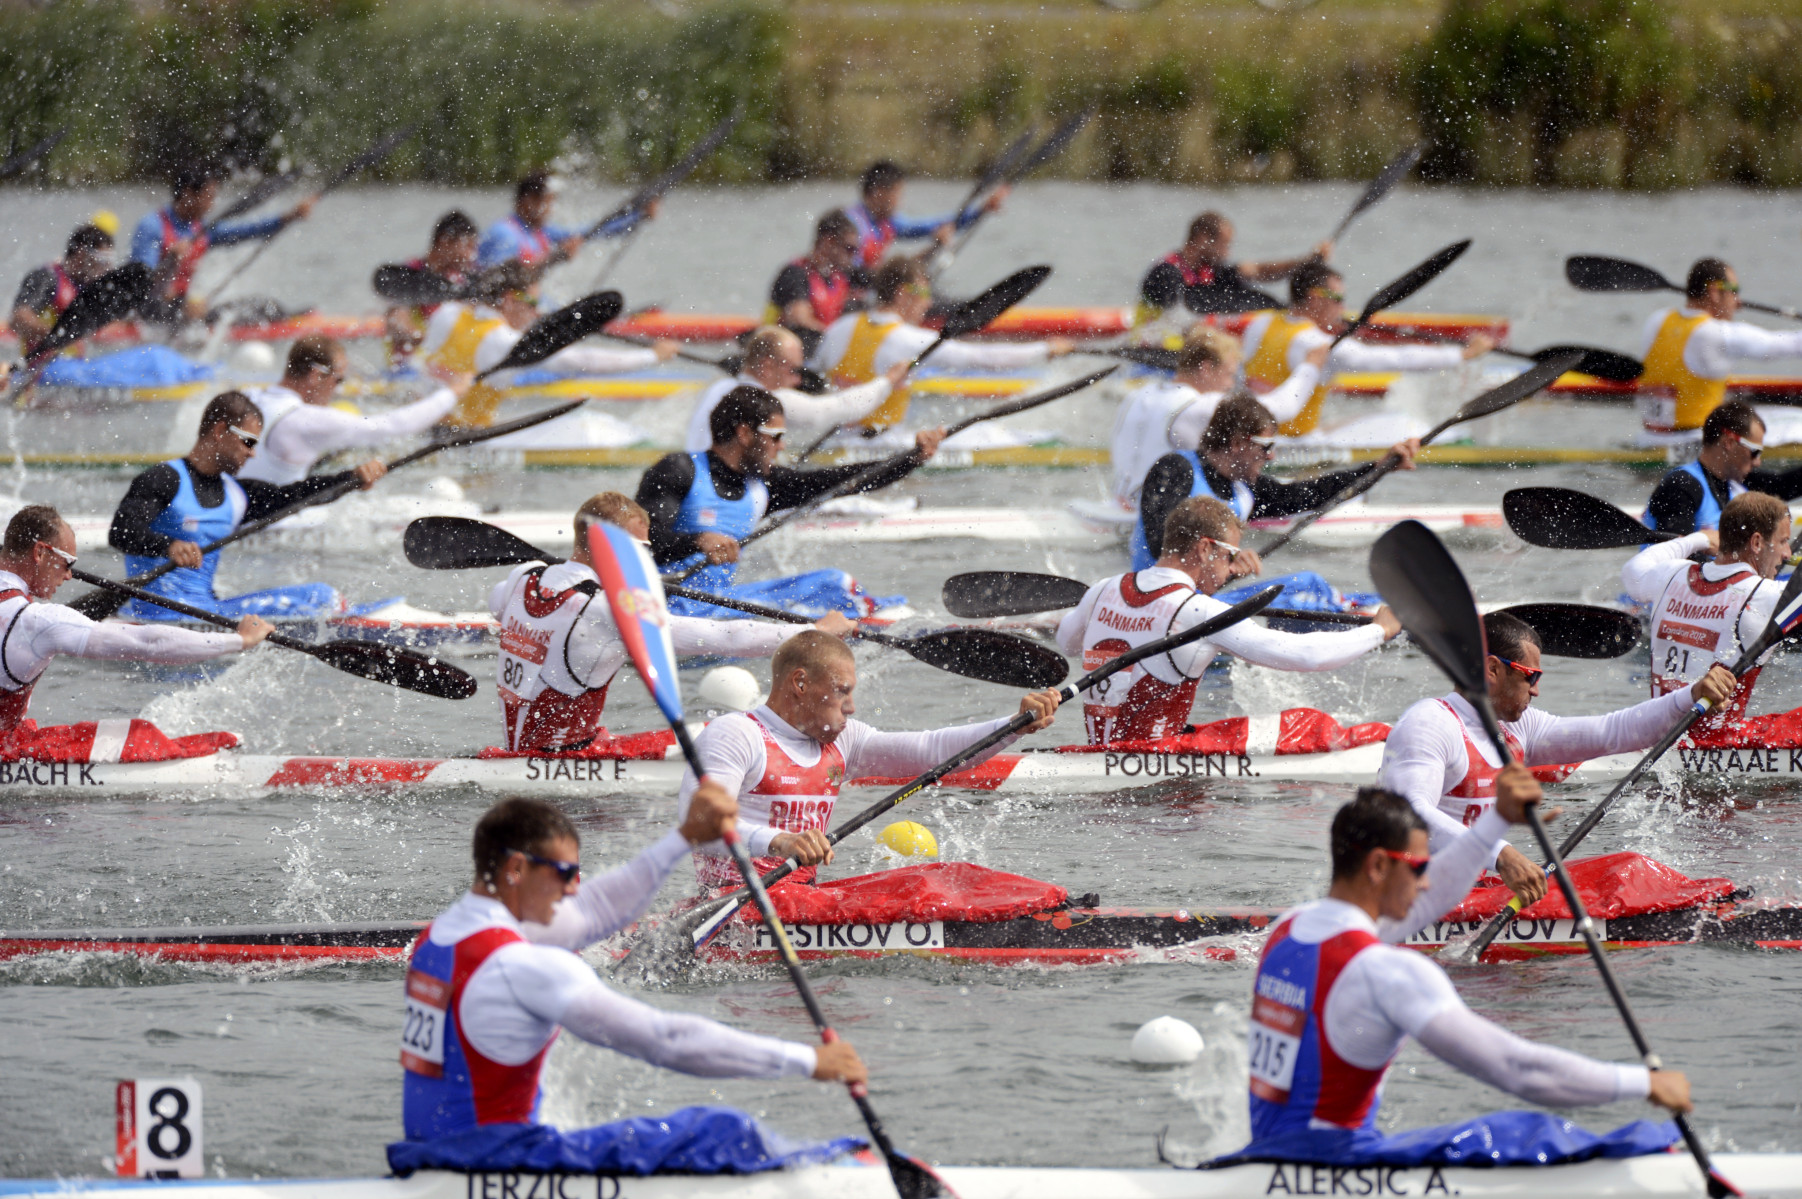 Men's Kayak 4 (K4) 1000 Meter Sprint at Eton Dorney during the London Olympics.  : Olympics : Photography by Adam Stoltman: Sports Photography, The Arts, Portraiture, Travel, Photojournalism and Fine Art in New York